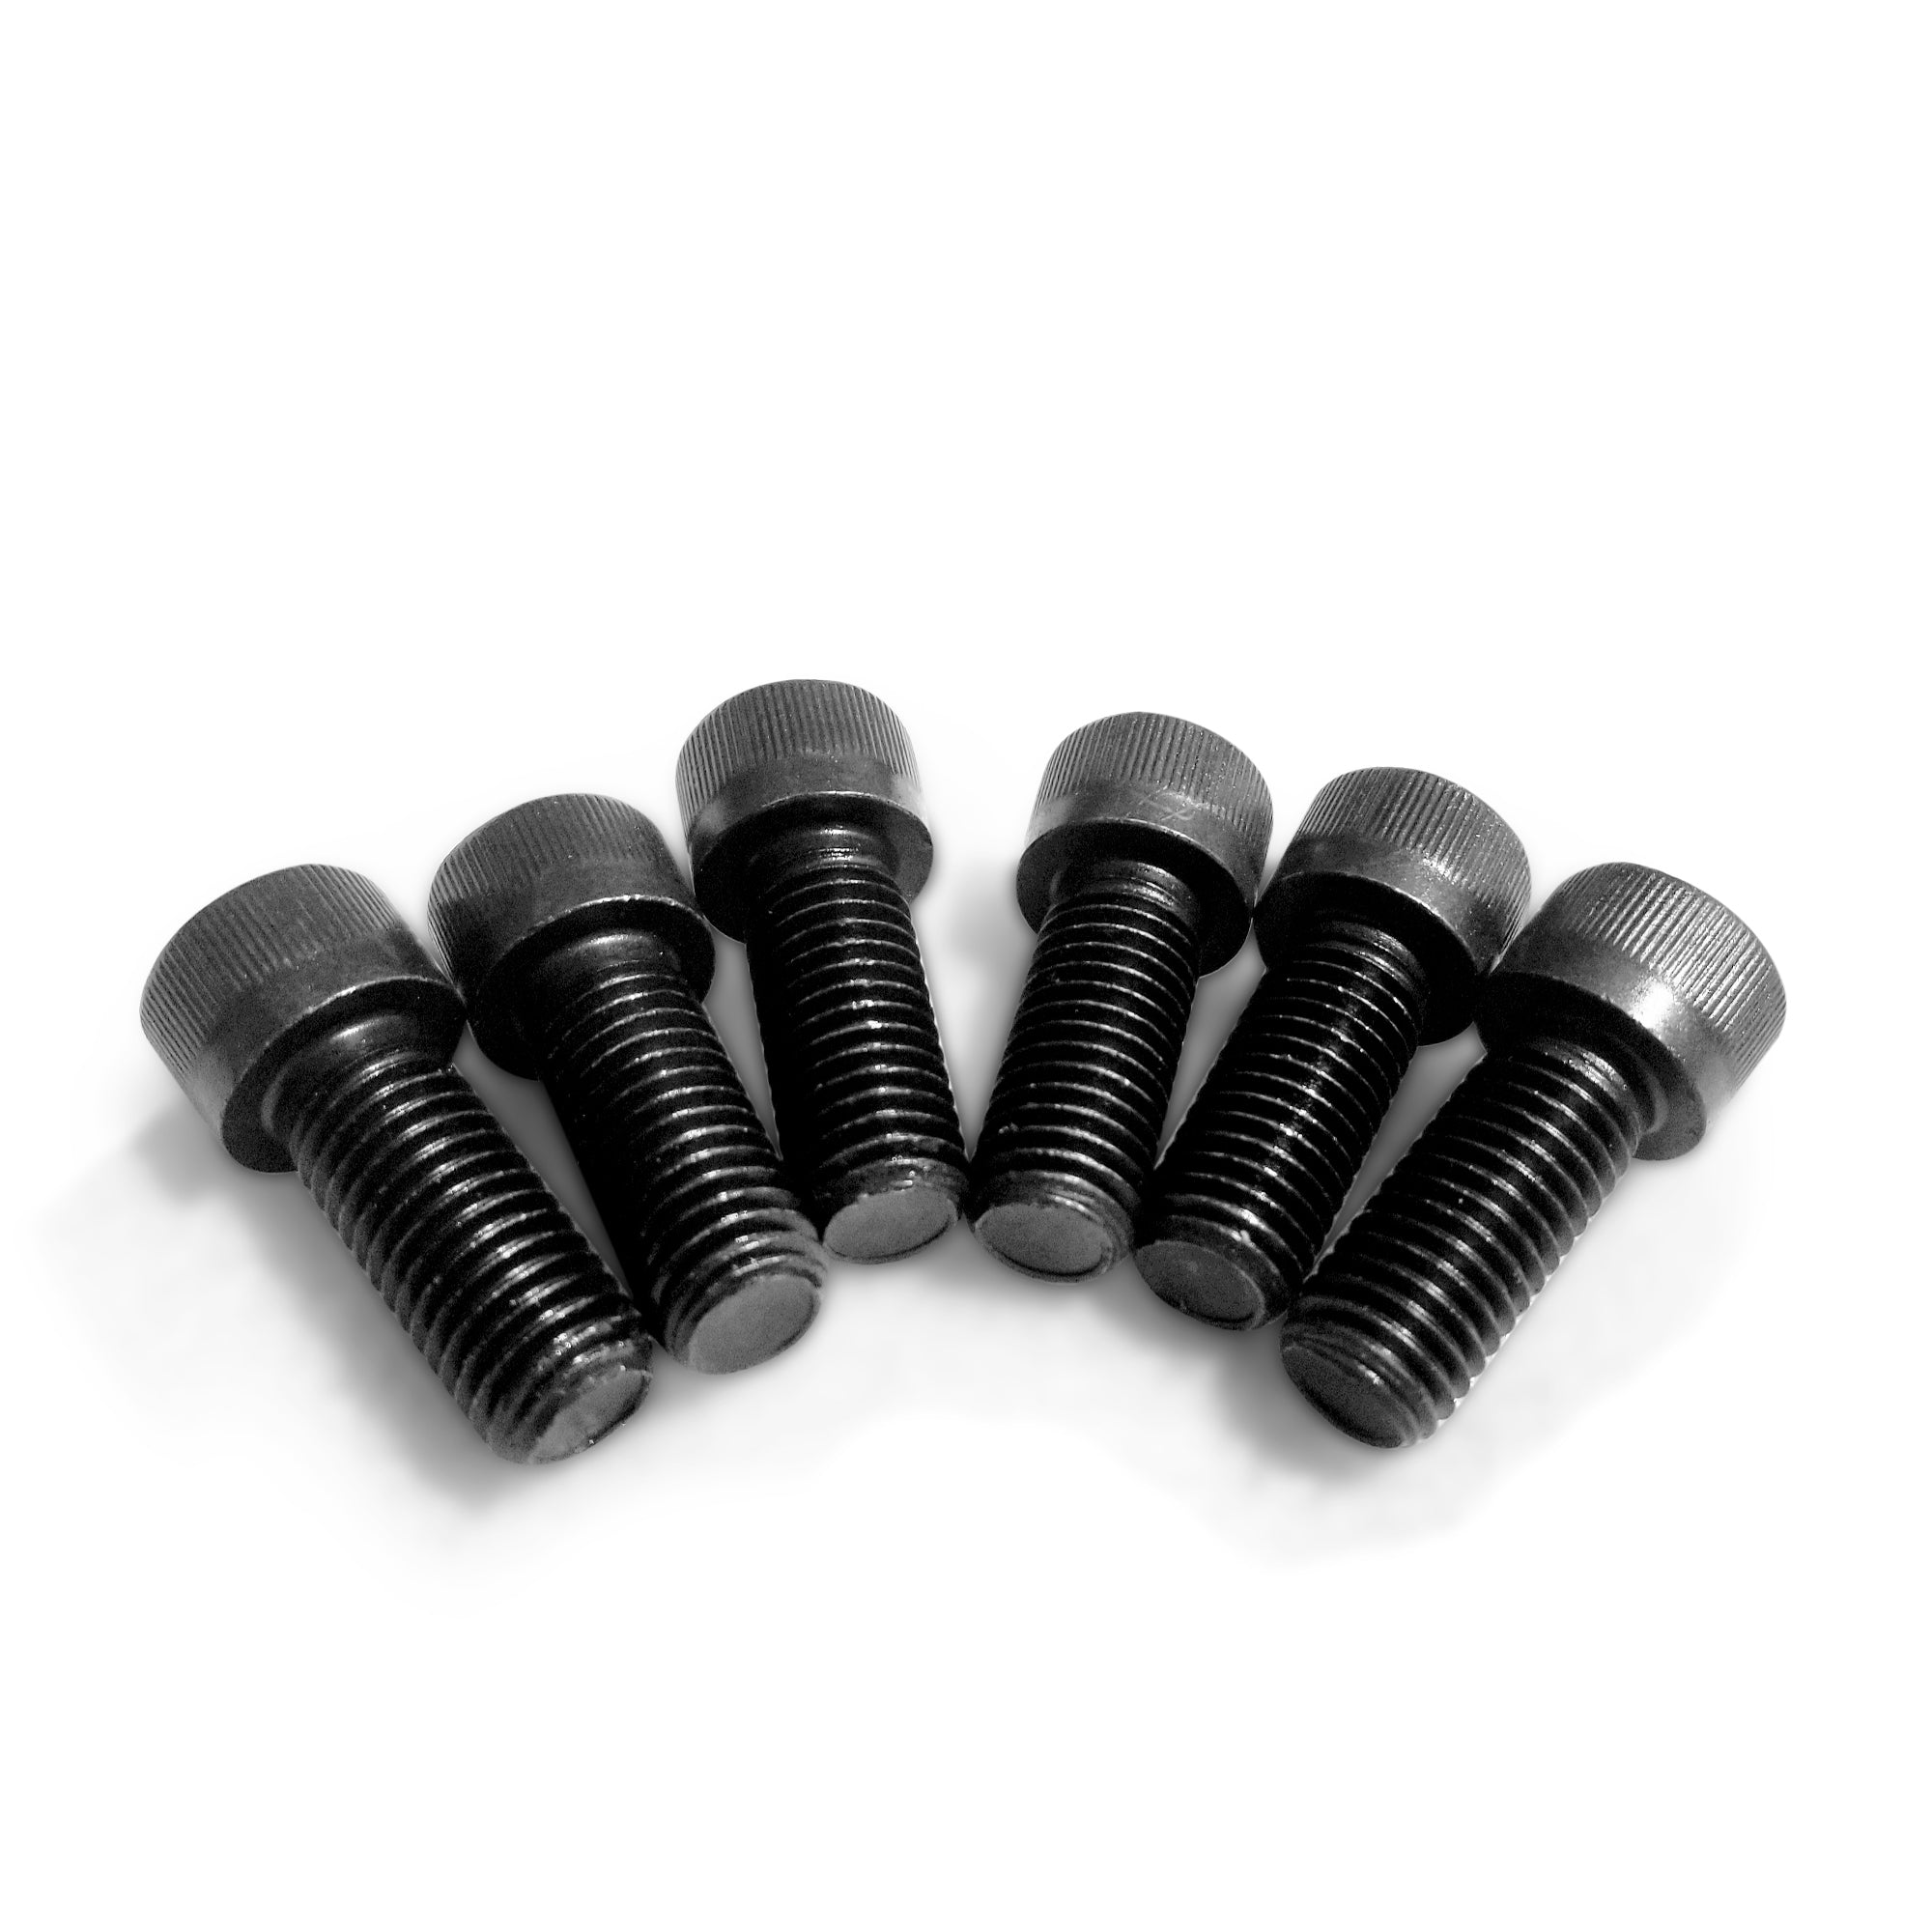 Turner M10 x 30 mm Bolts for Kitagawa (B-206), Samchully, Auto Strong T-Nuts (6 Pack)